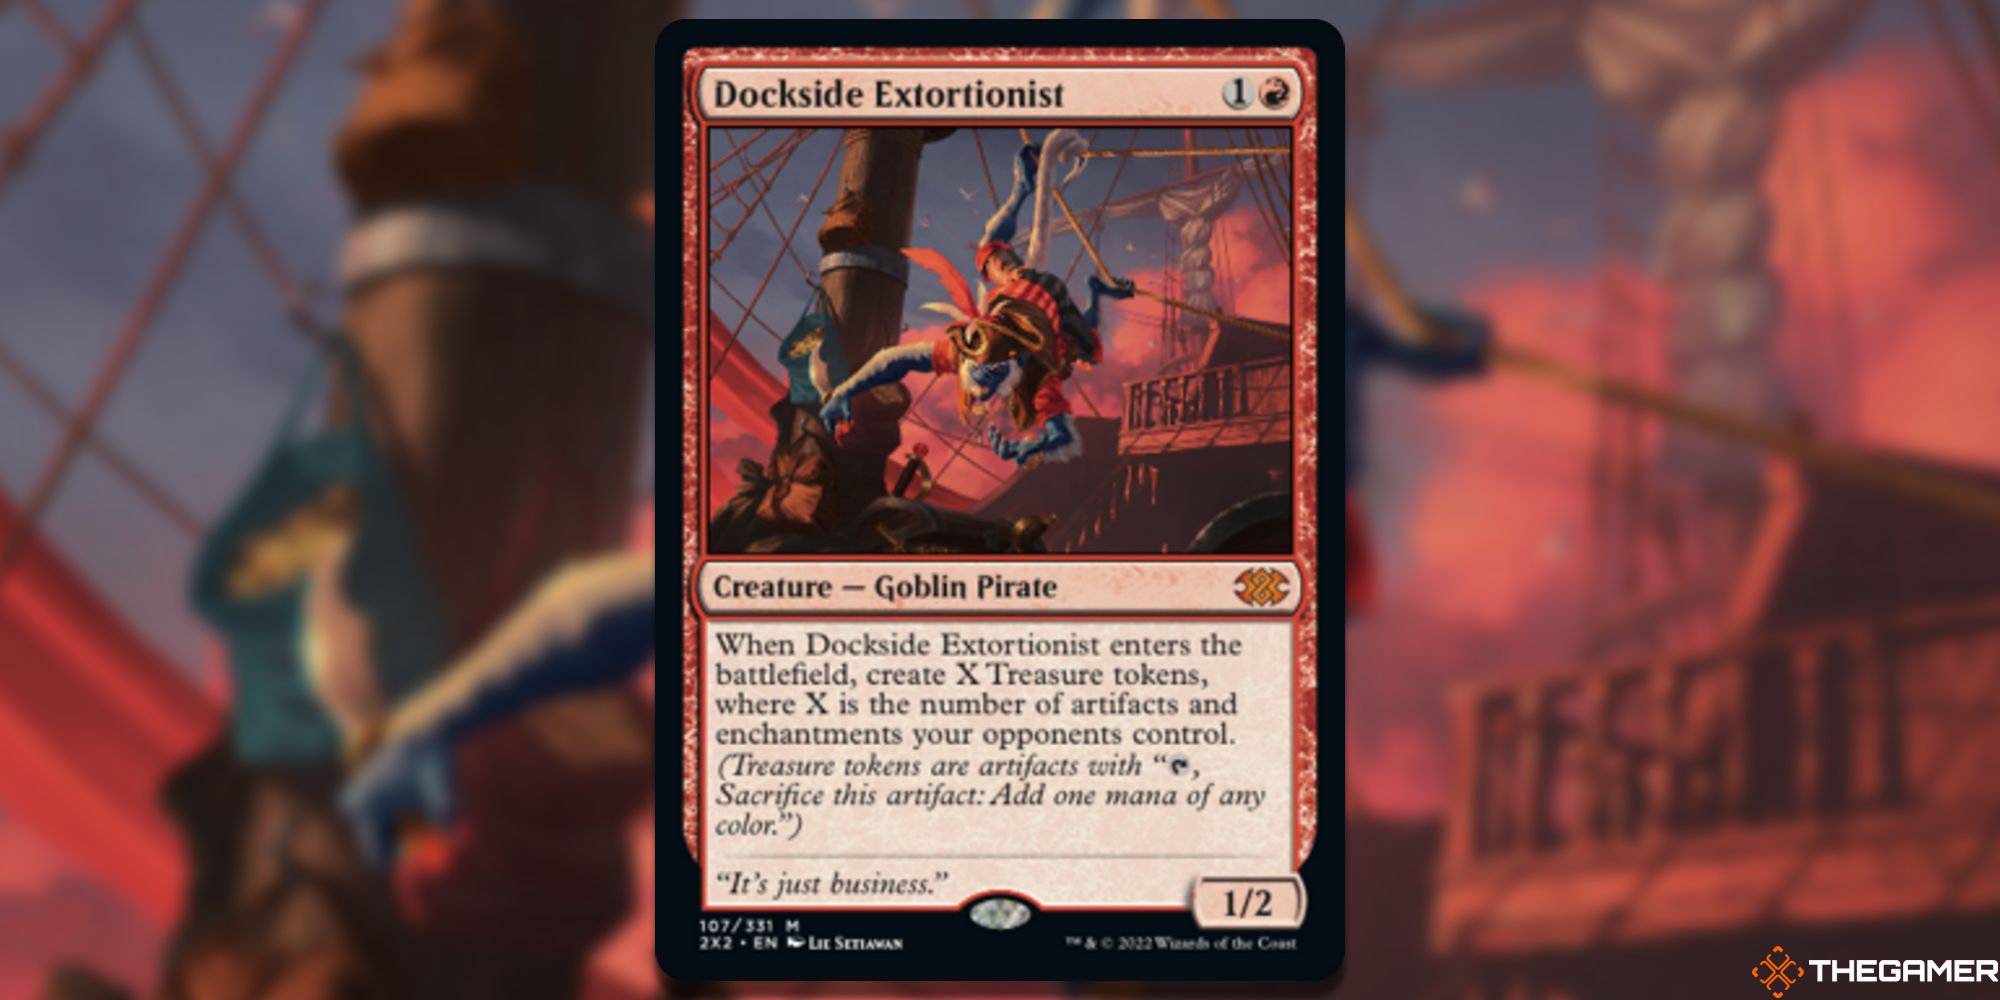 Image of the Dockside Extortionist card in Magic: The Gathering, with art by Lie Setiawan